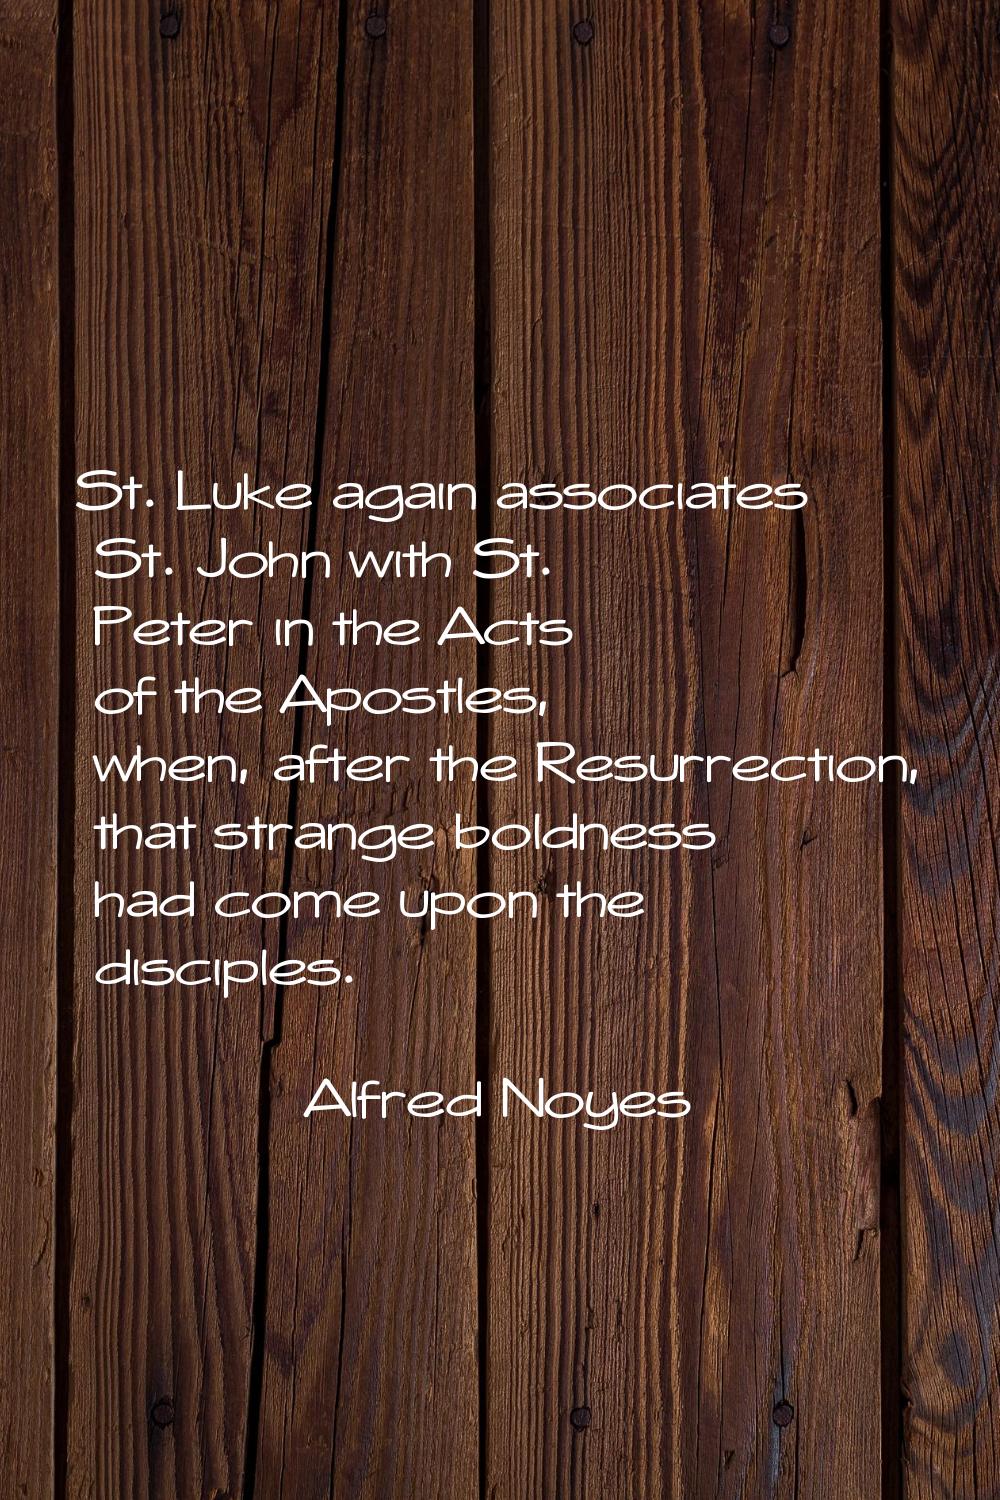 St. Luke again associates St. John with St. Peter in the Acts of the Apostles, when, after the Resu